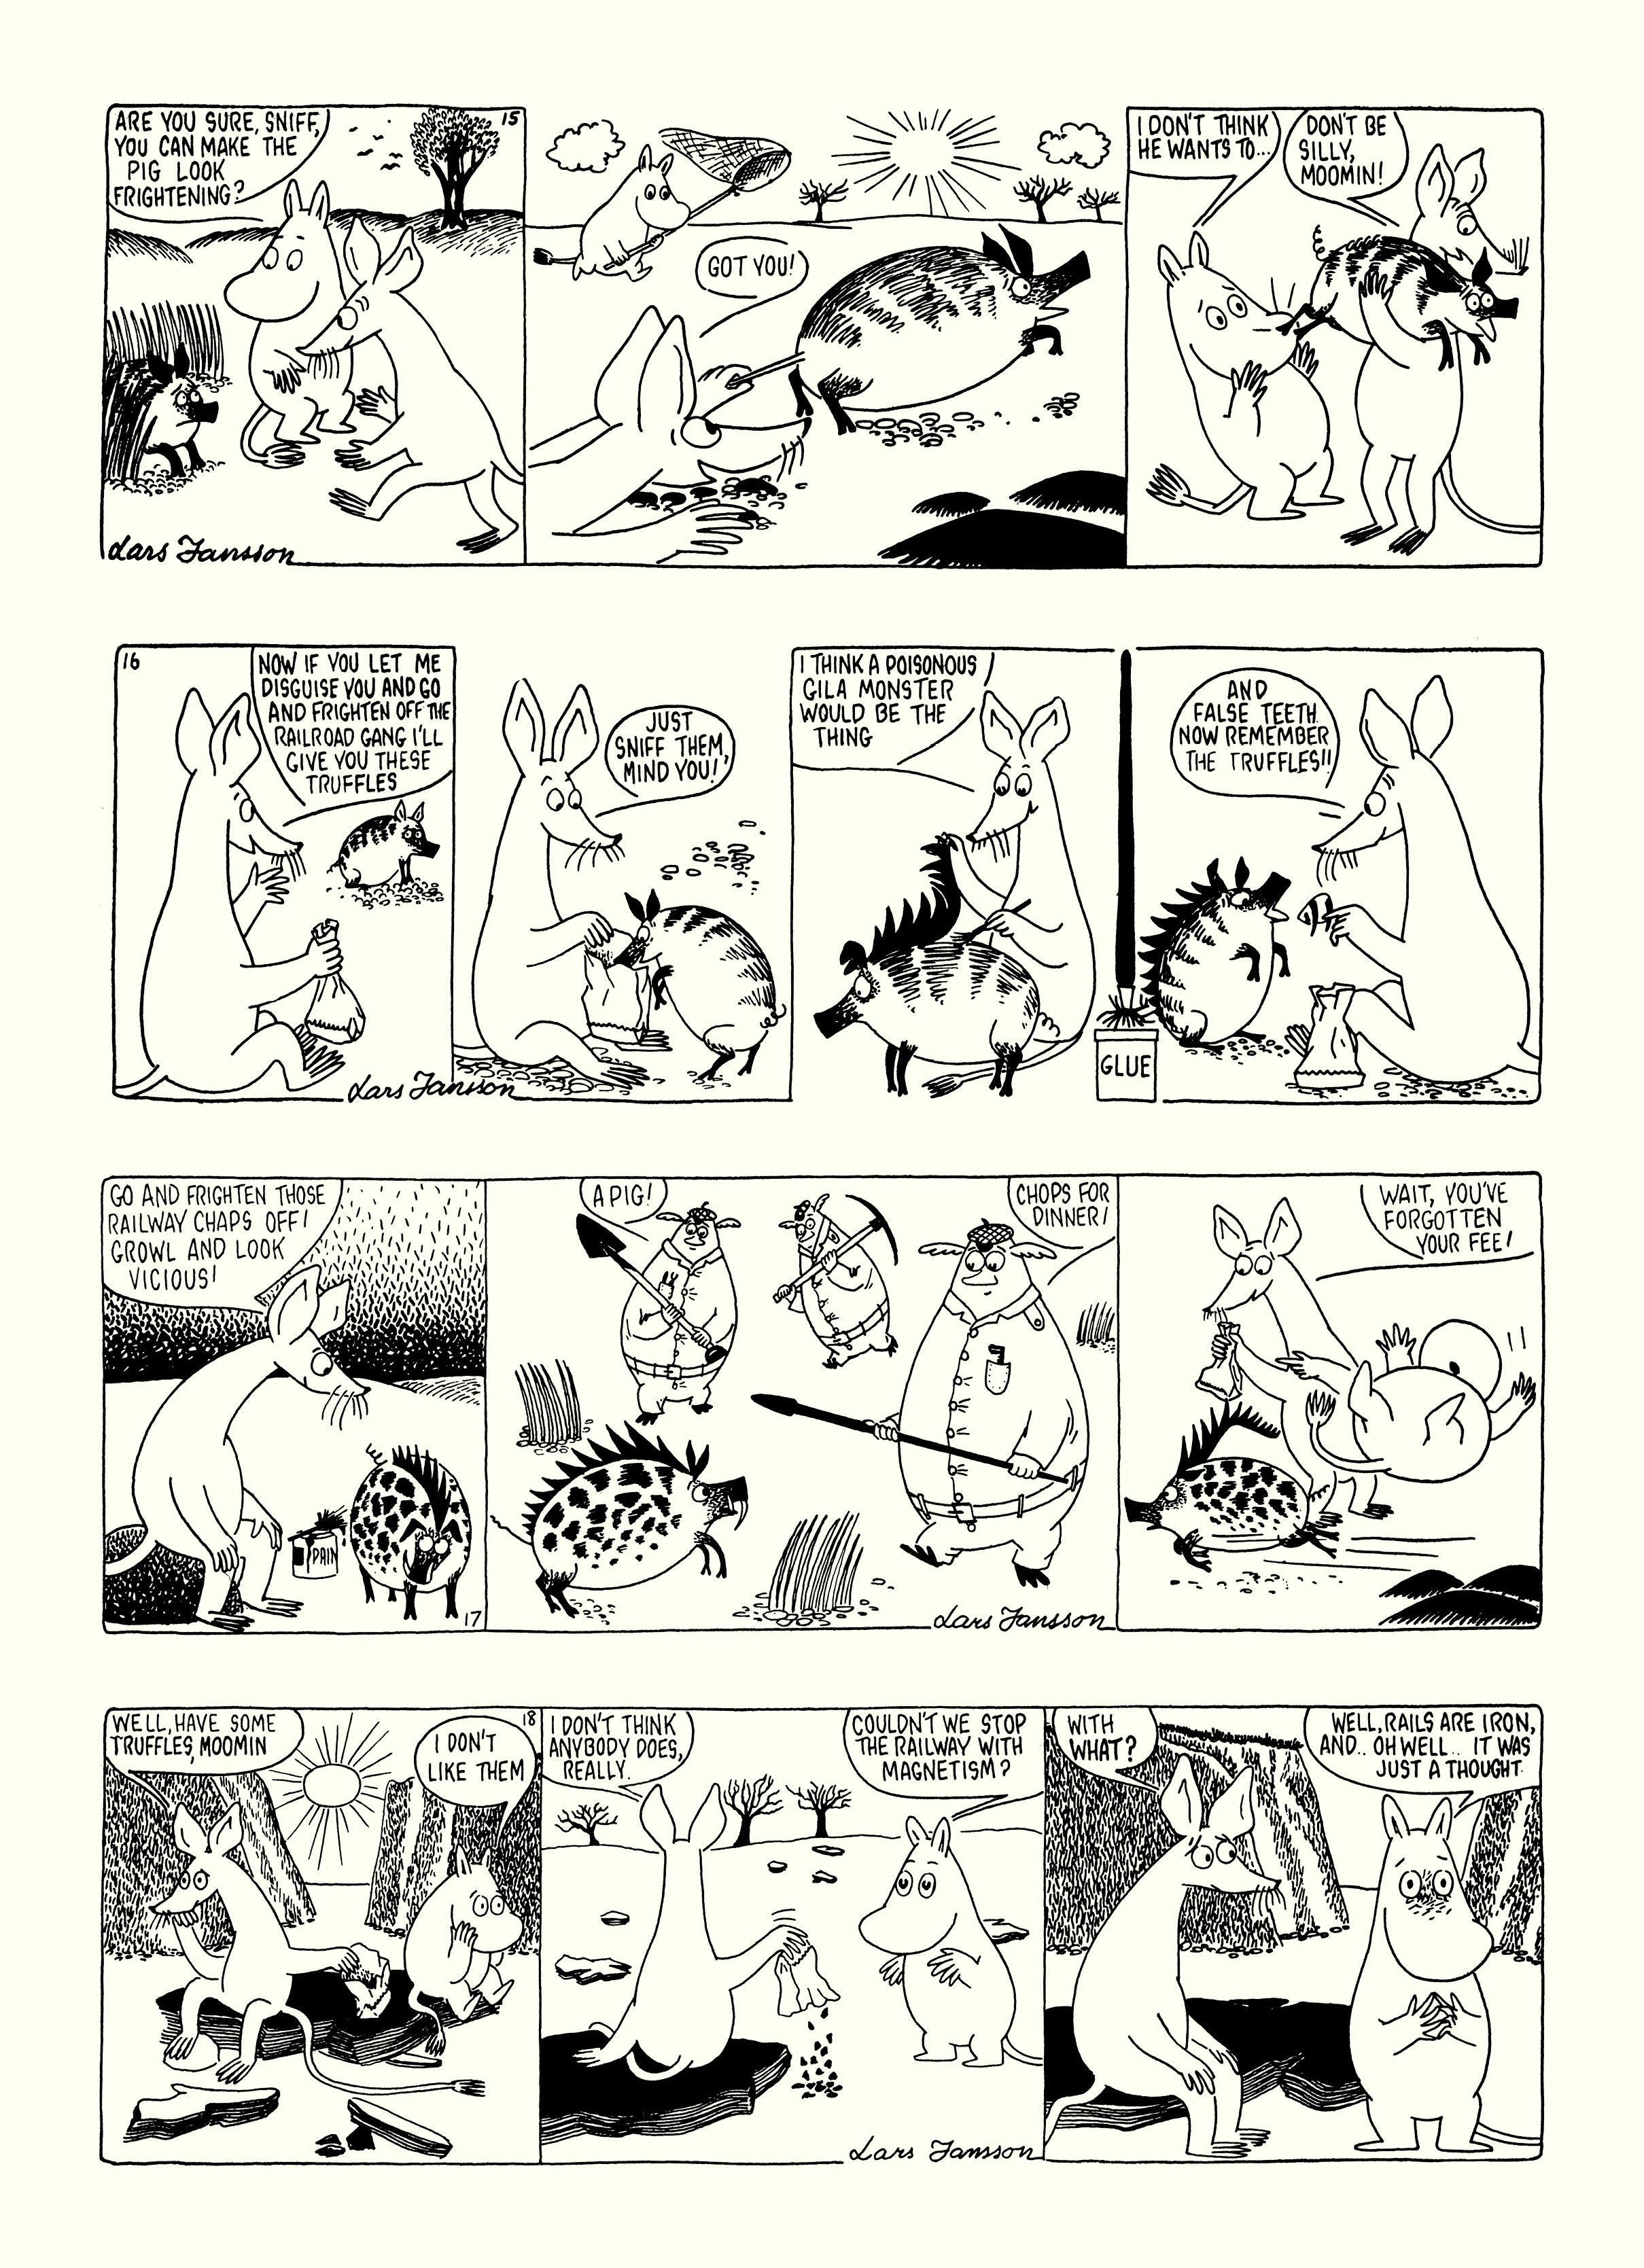 Read online Moomin: The Complete Lars Jansson Comic Strip comic -  Issue # TPB 6 - 30